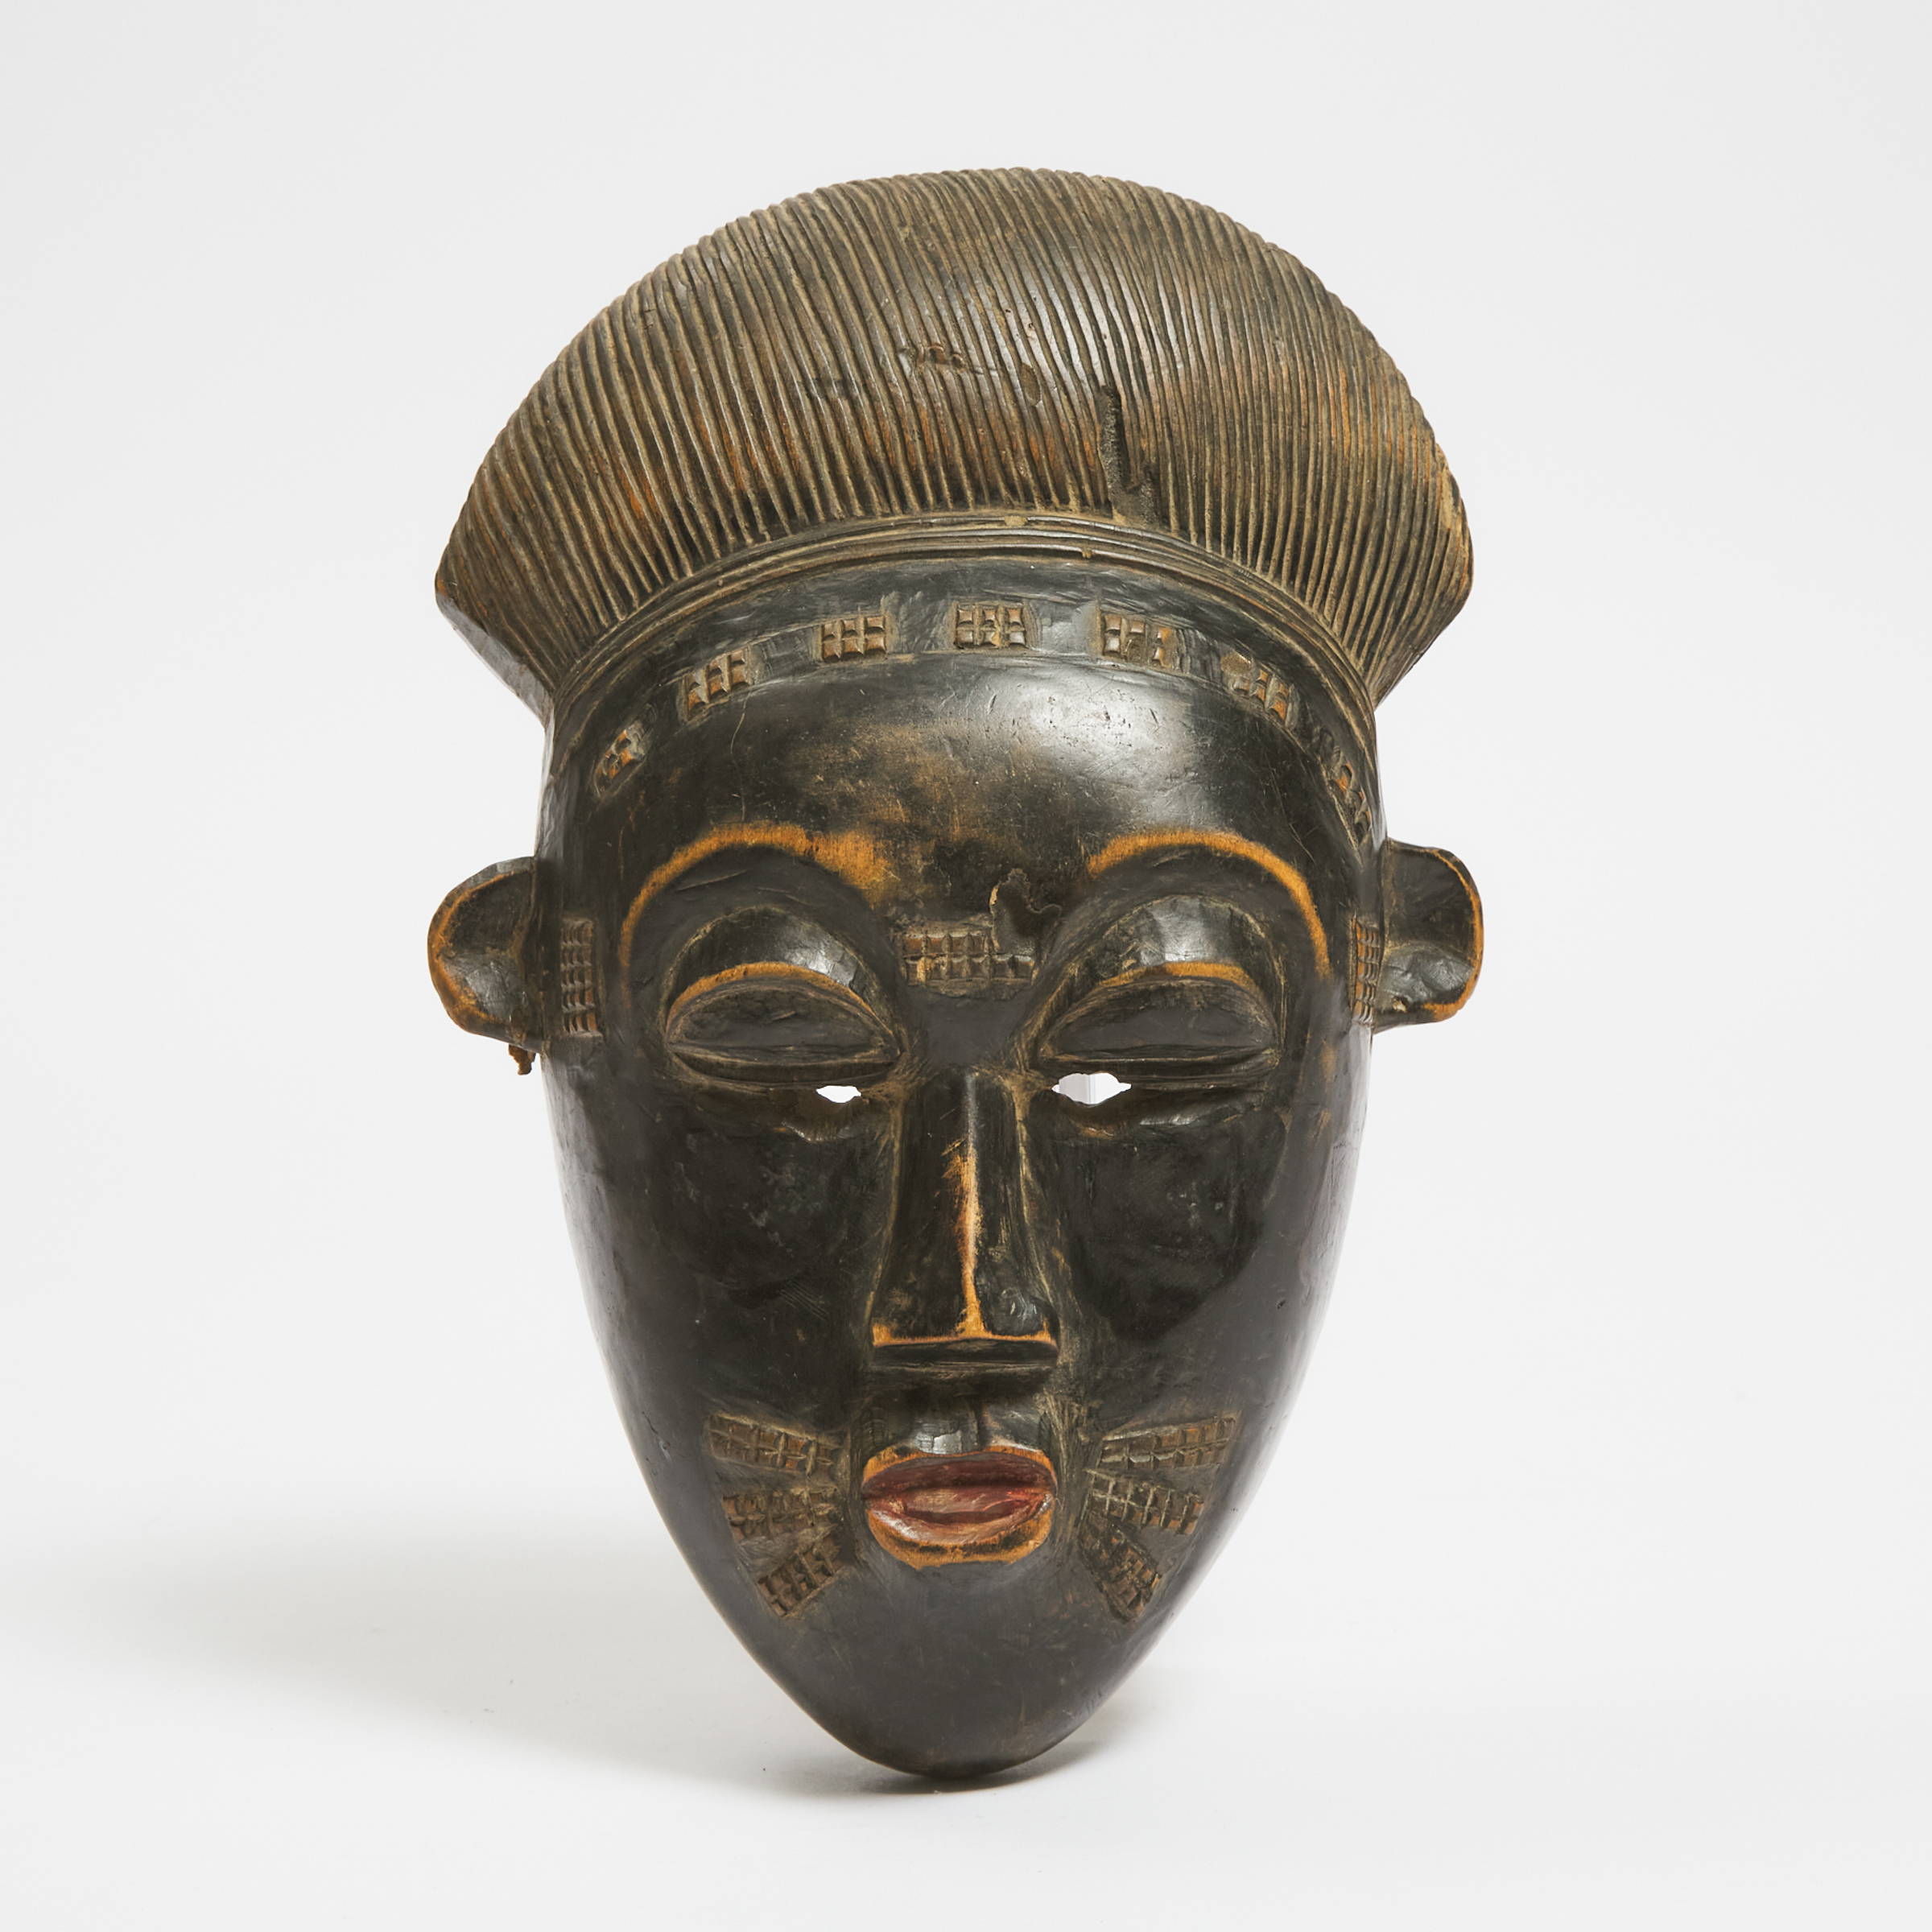 Baule Mask, Ivory Coast, West Africa, early to mid 20th century